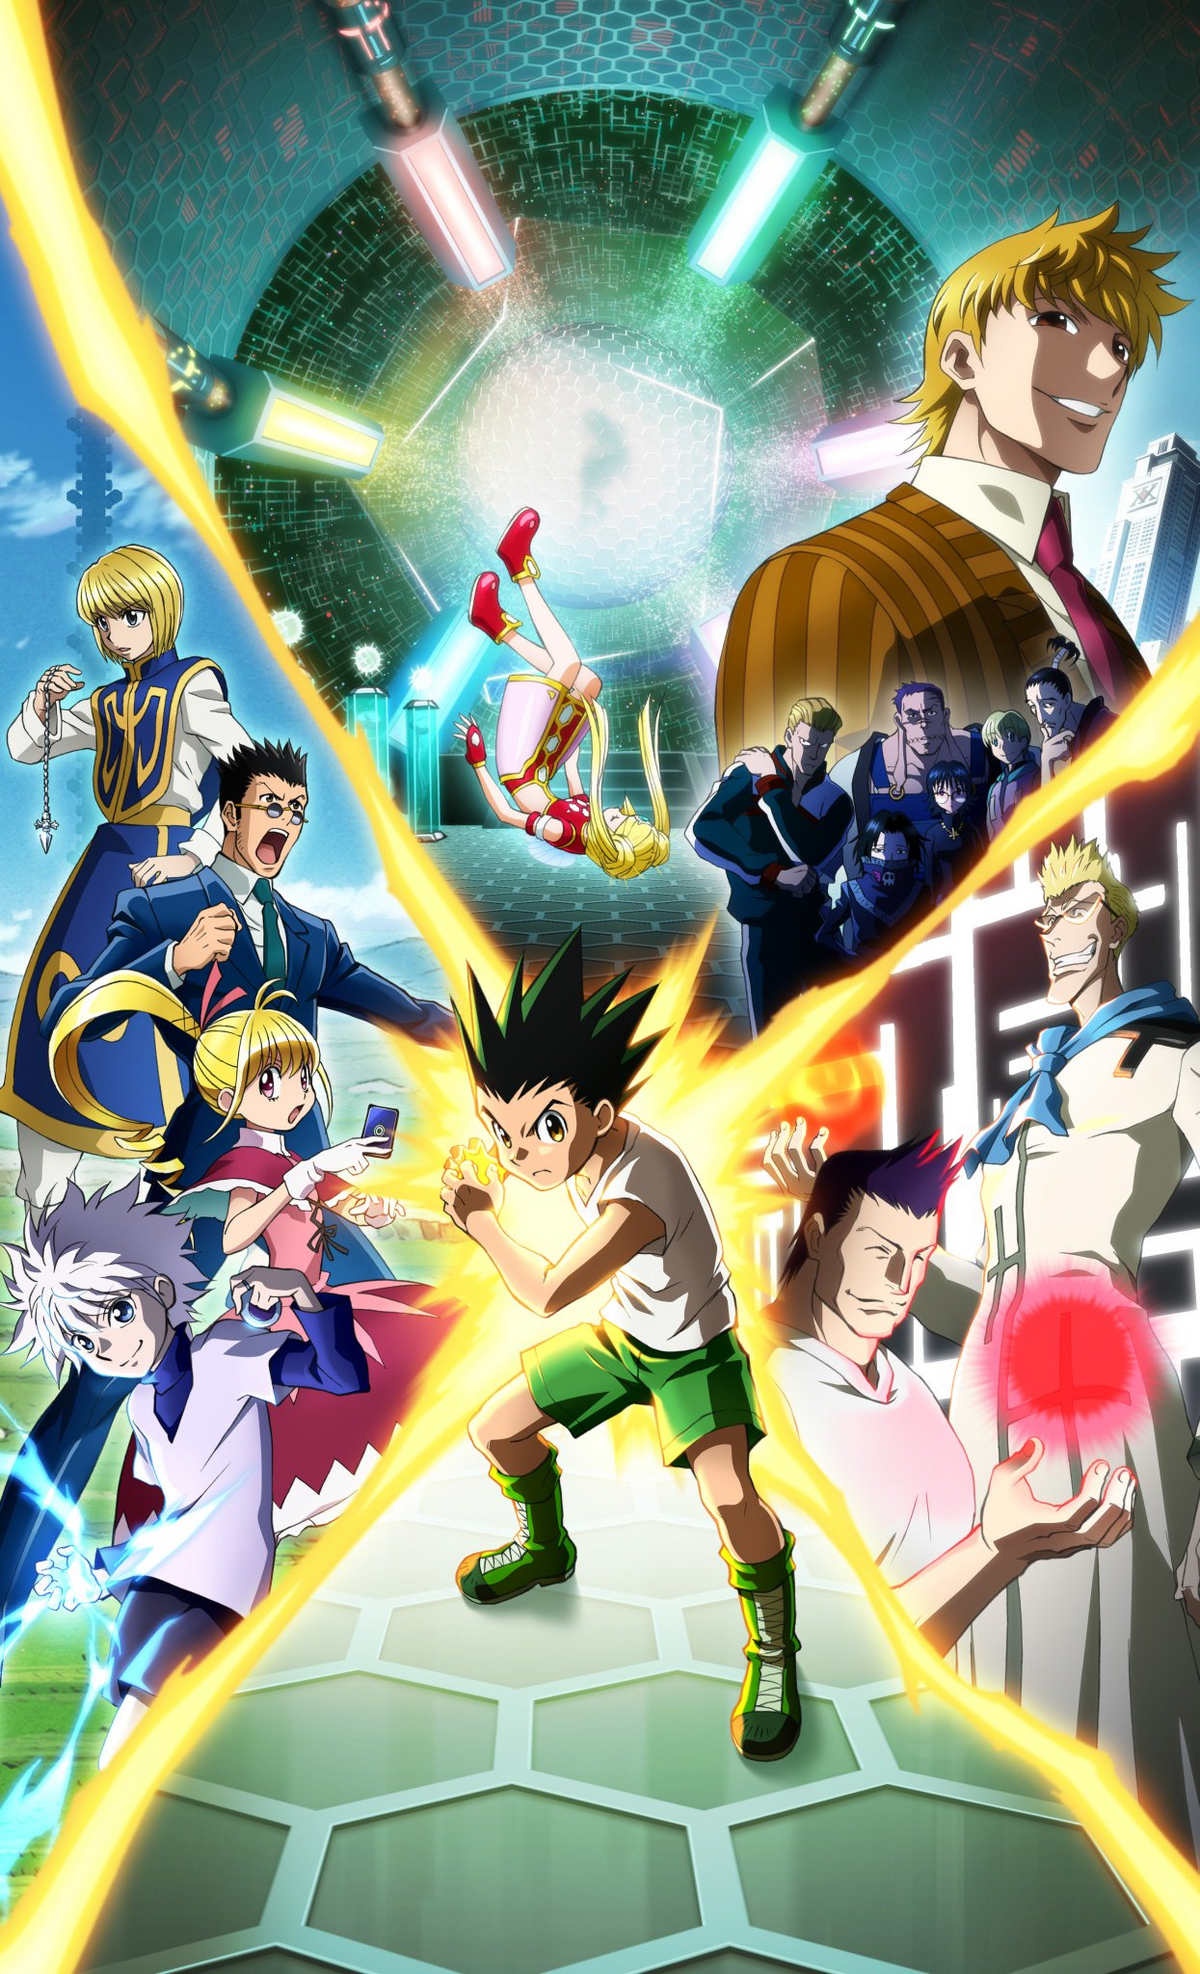 Anime crazia - Anime: Hunter x Hunter Genres: Action, Adventure, Super  Power, Shounen. Synopsis:- Hunter x Hunter is set in a world where Hunters  exist to perform all manner of dangerous tasks